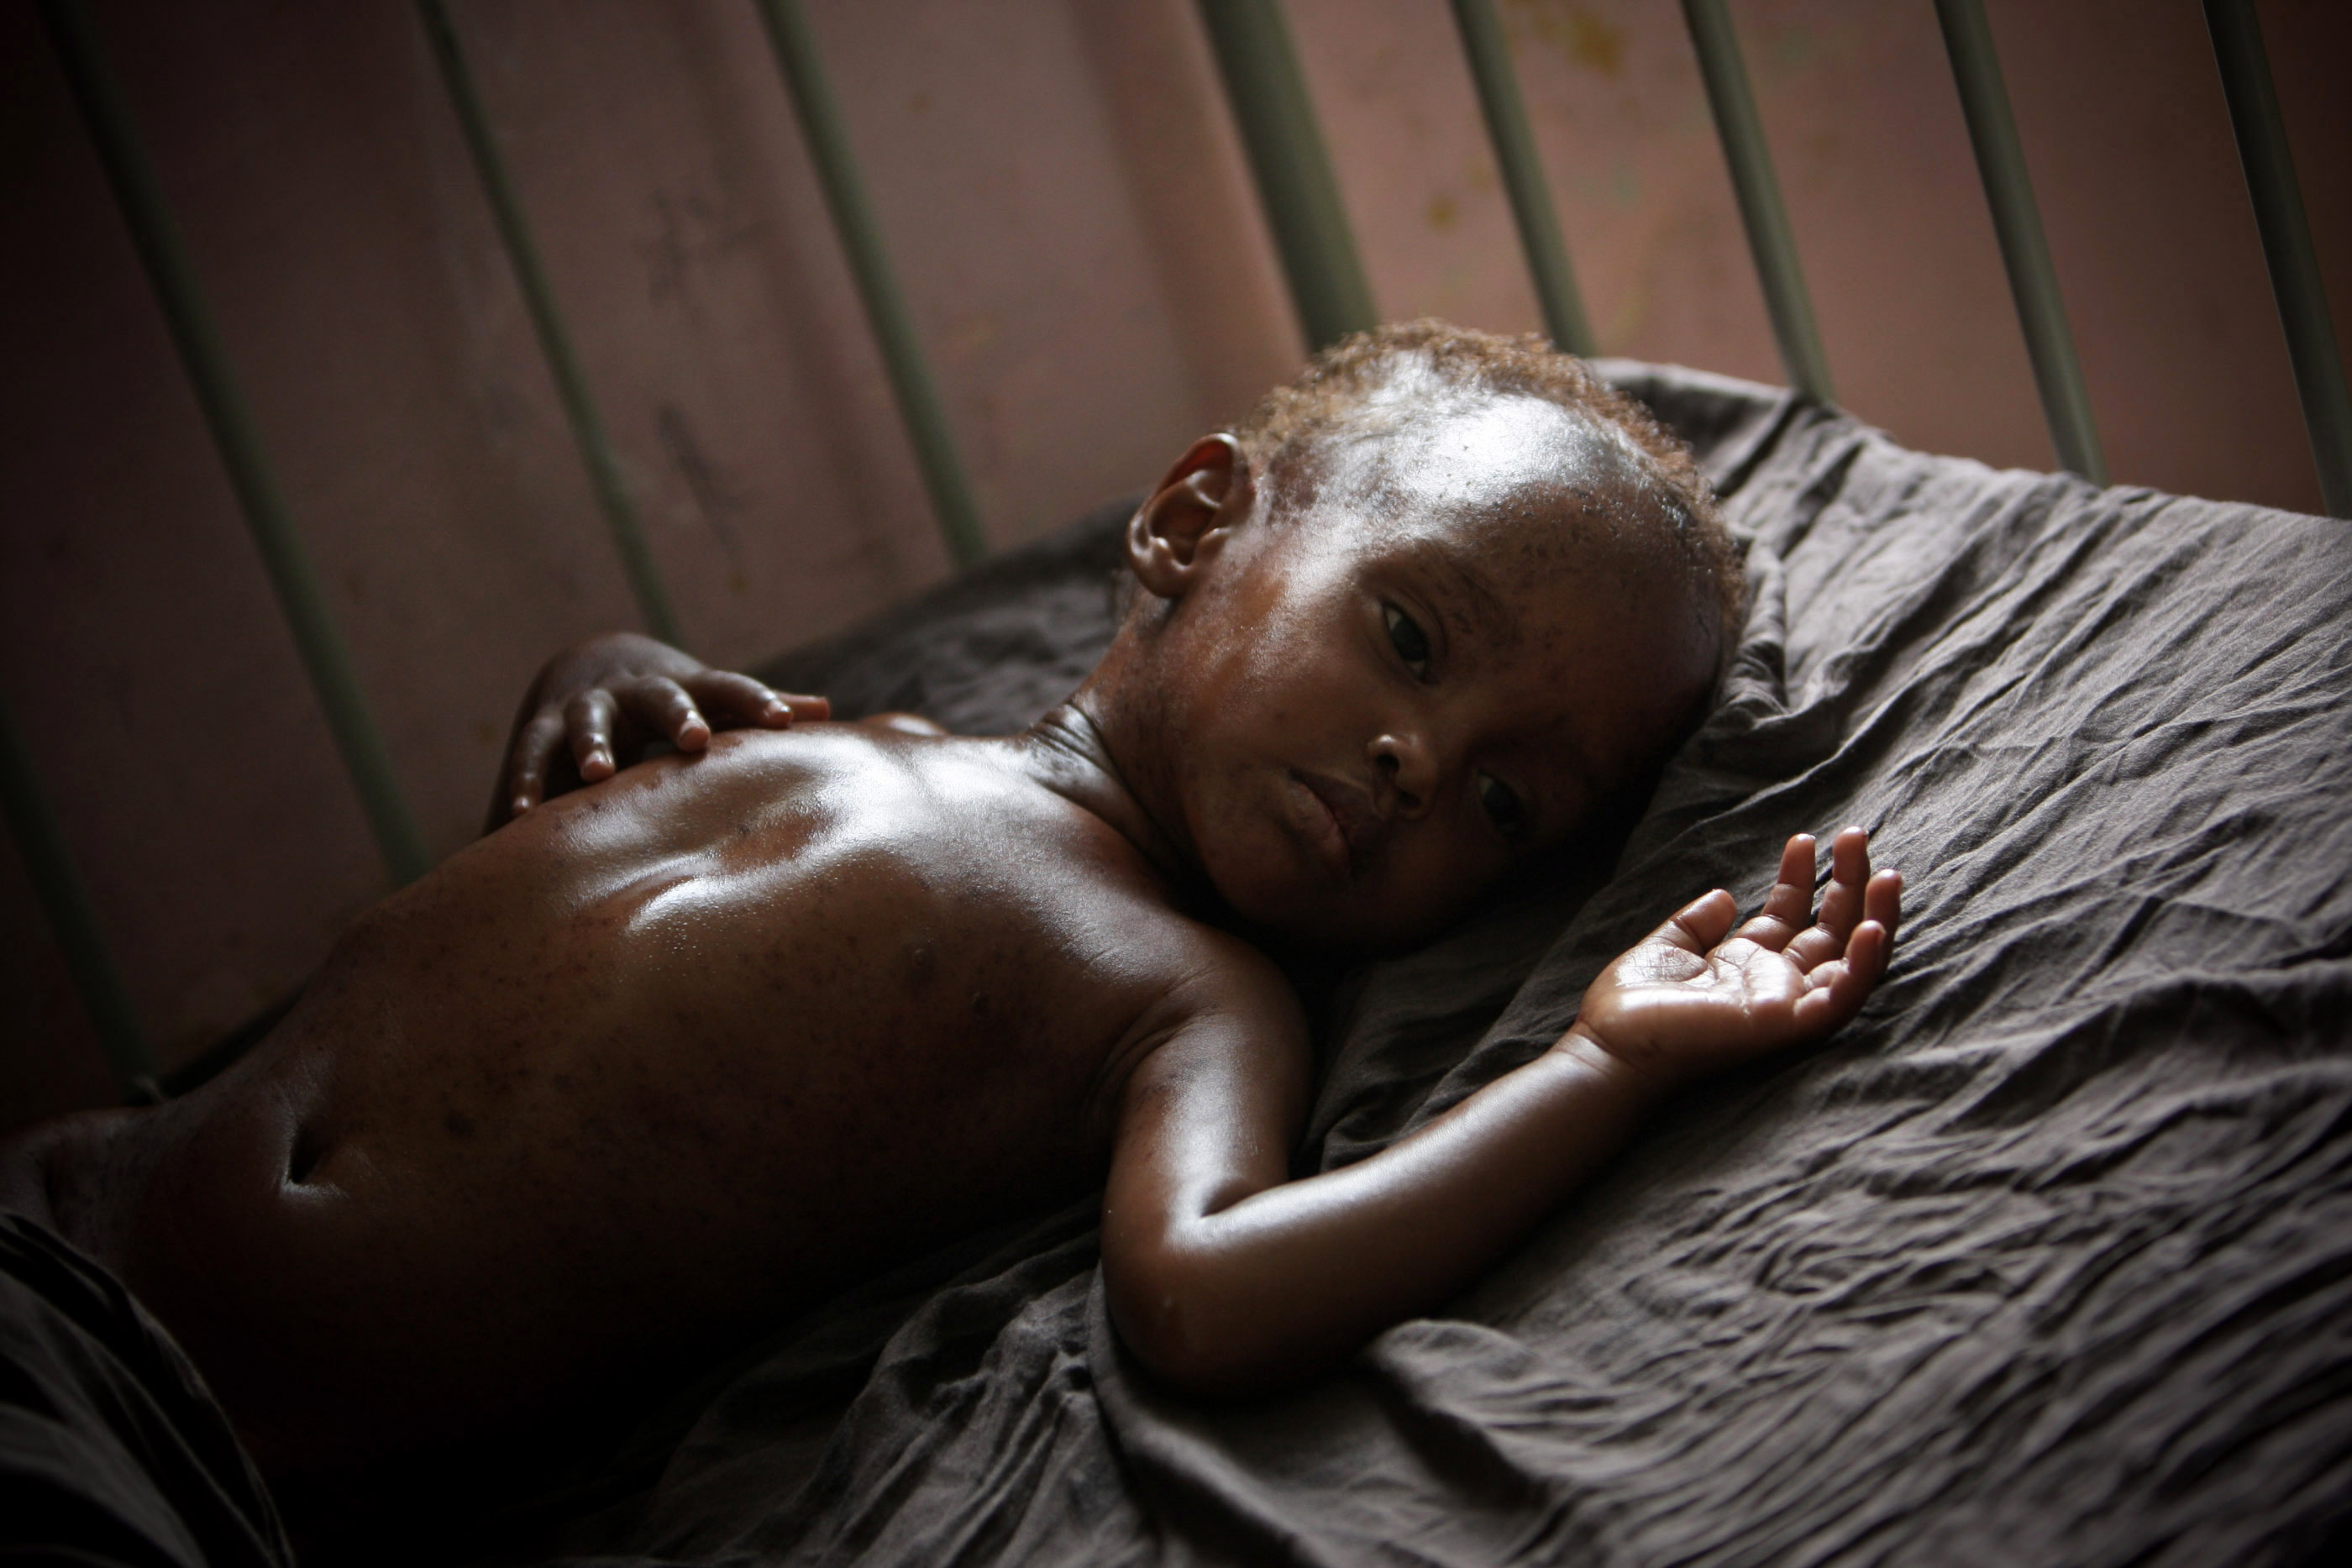 SOMALIA, Mogadishu: In a photograph released by the African Union-United Nations Information Support Team 10 August, a malnourished and dehydrated child lies on a bed in Banadir Hospital in the Somali capital Mogadishu. Somalia is gripped by a devastating drought and famine that has already killed tens of thousands and leaving many hundreds of thousands more, particularly young children and babies, in desperate need of emergency life-saving humanitarian assistance from the outside world. AU-UN IST PHOTO / STUART PRICE.